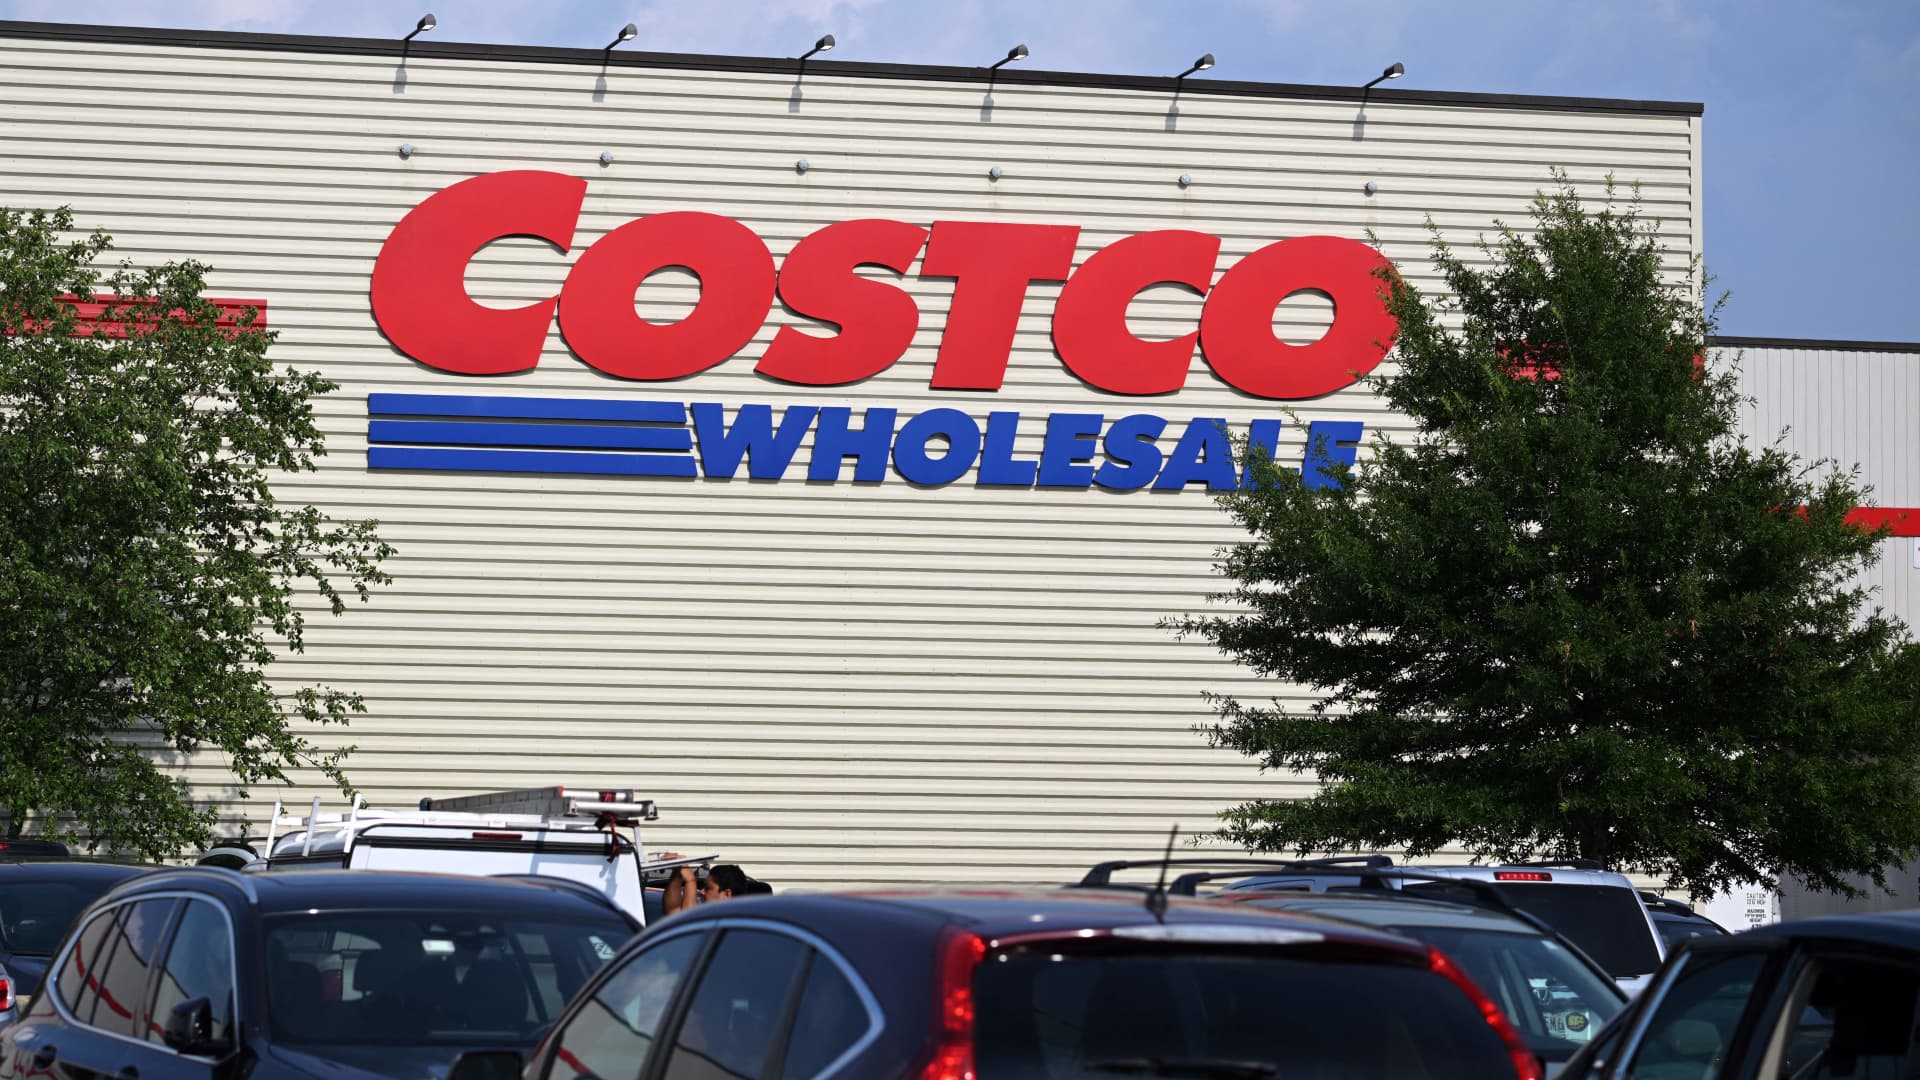 Costco CEO Craig Jelinek to step down Jan. 1. COO Ron Vachris will take over